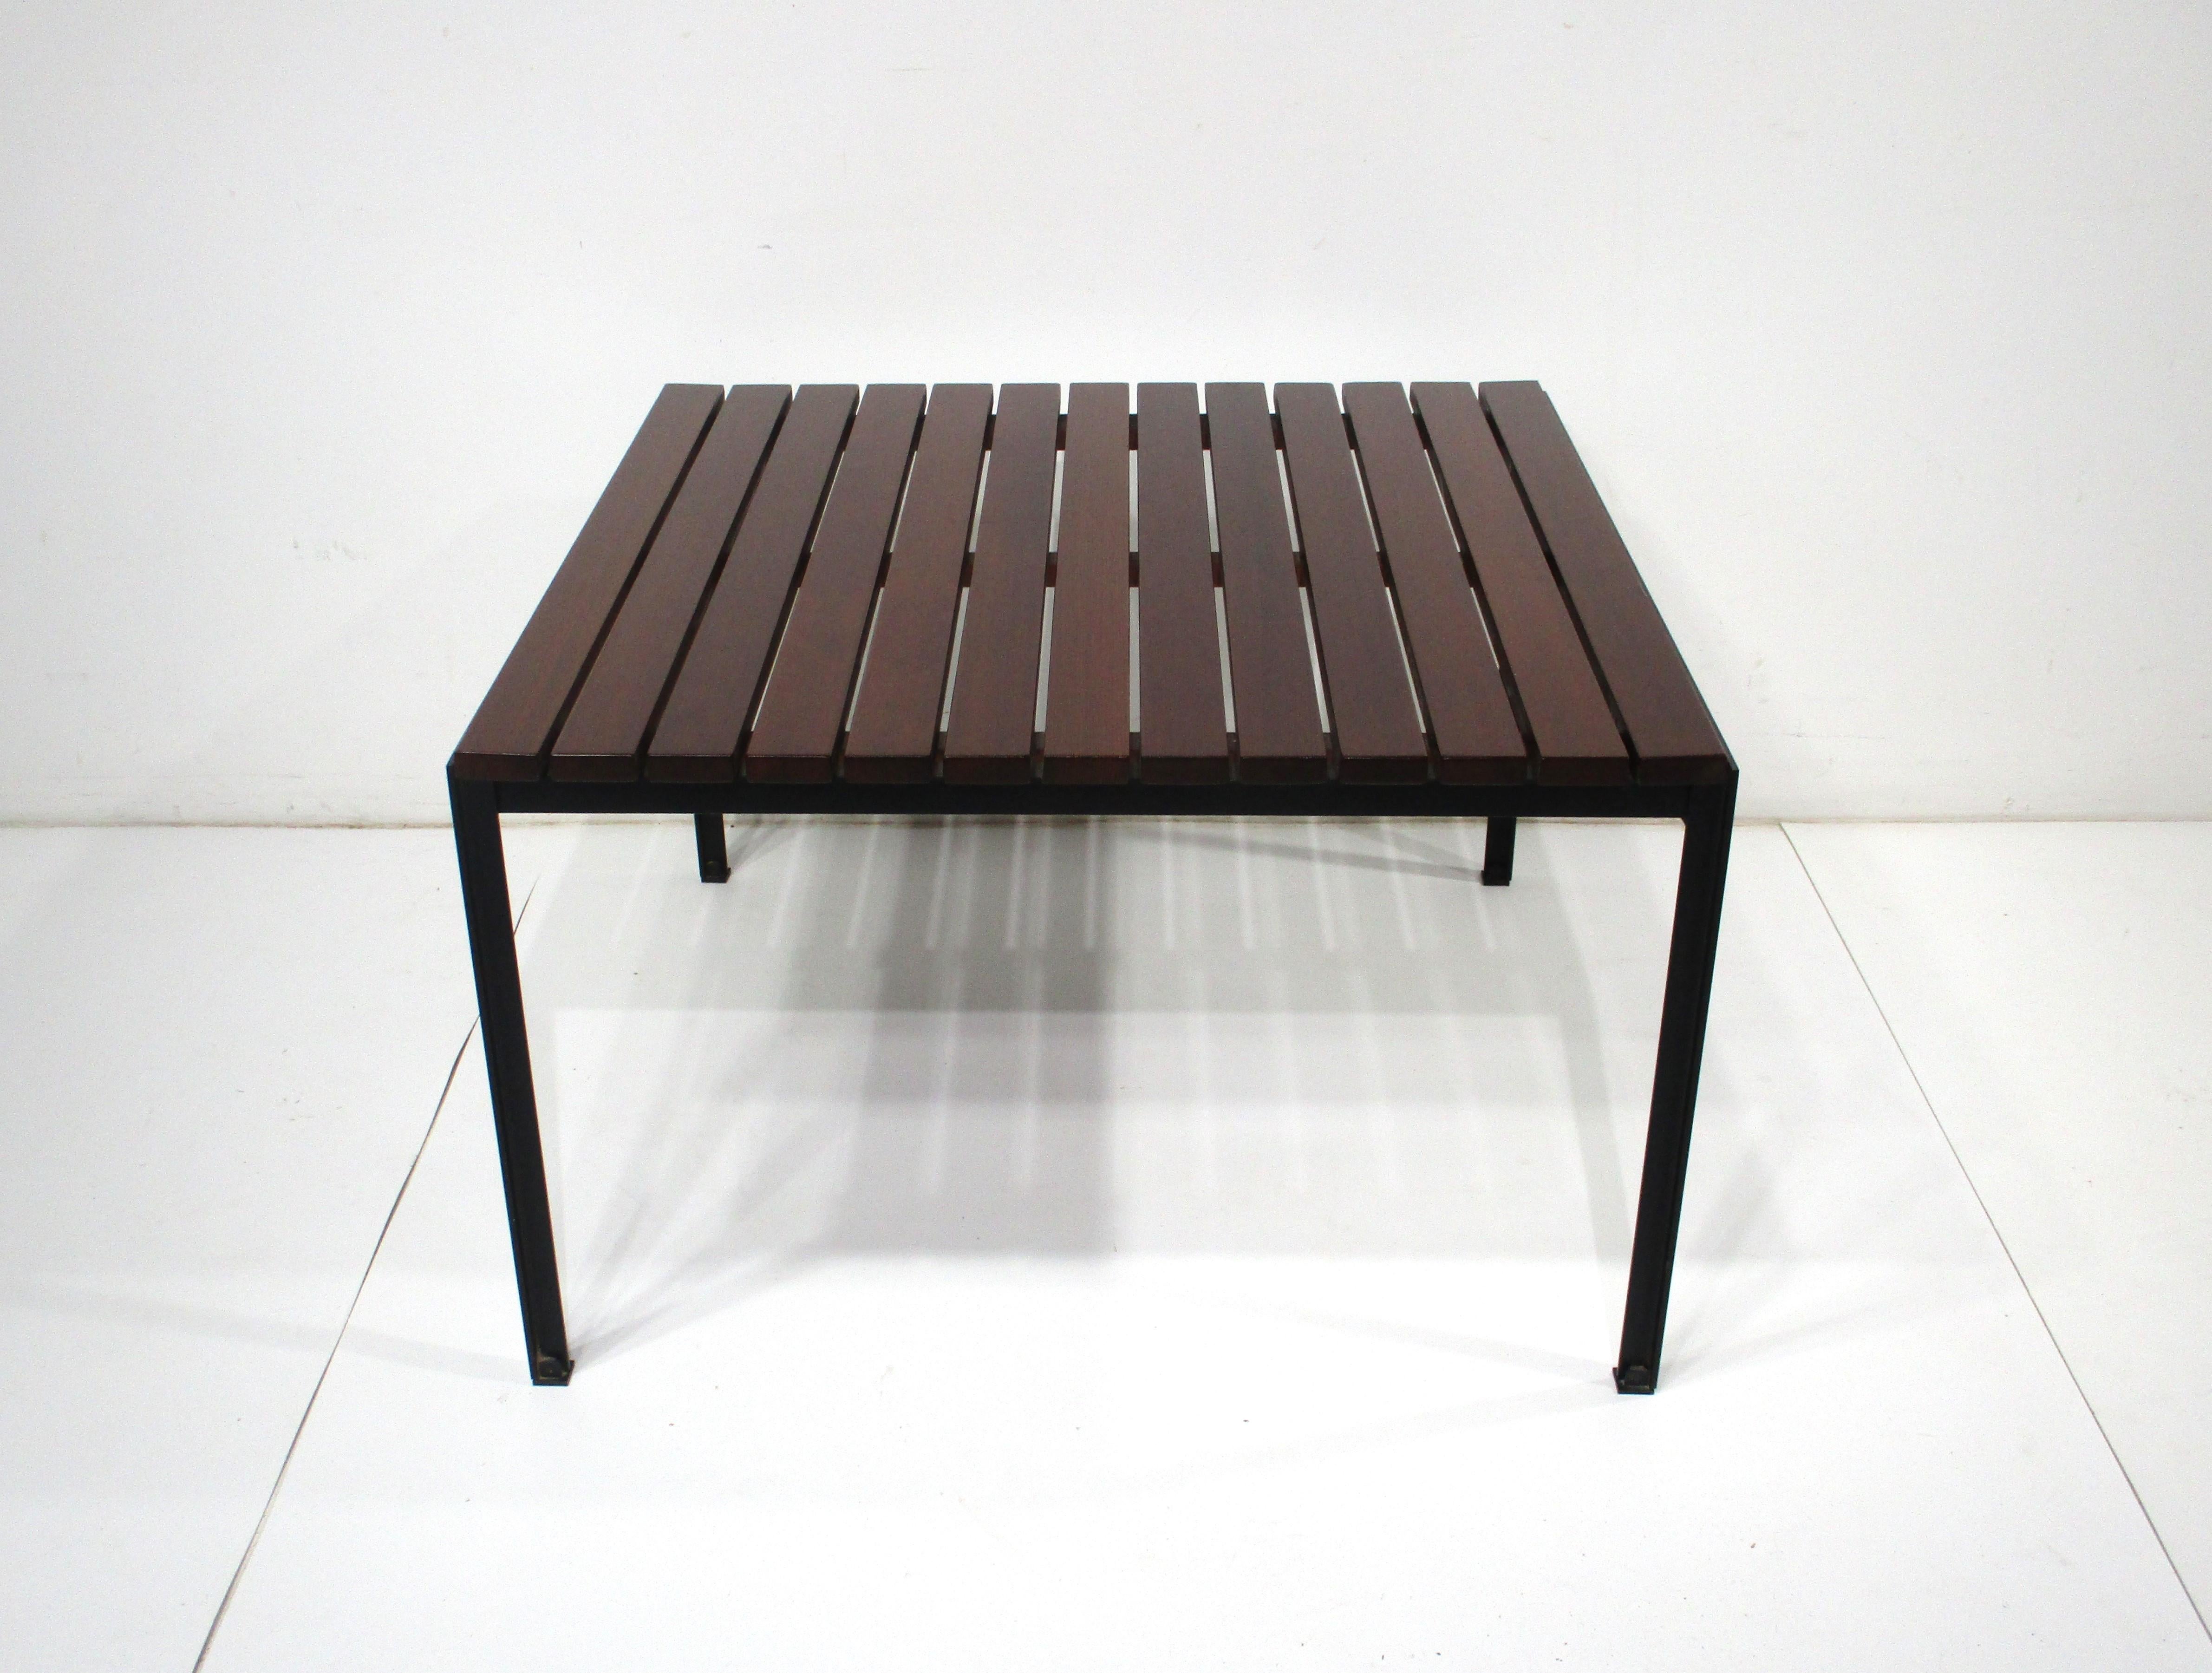 A rare dark slat redwood square coffee table having a black metal base that's been angle formed as in it's given name T Angle table . This hard to source form was designed by Florence Knoll in the late 1950's and retains the early fabric big K label